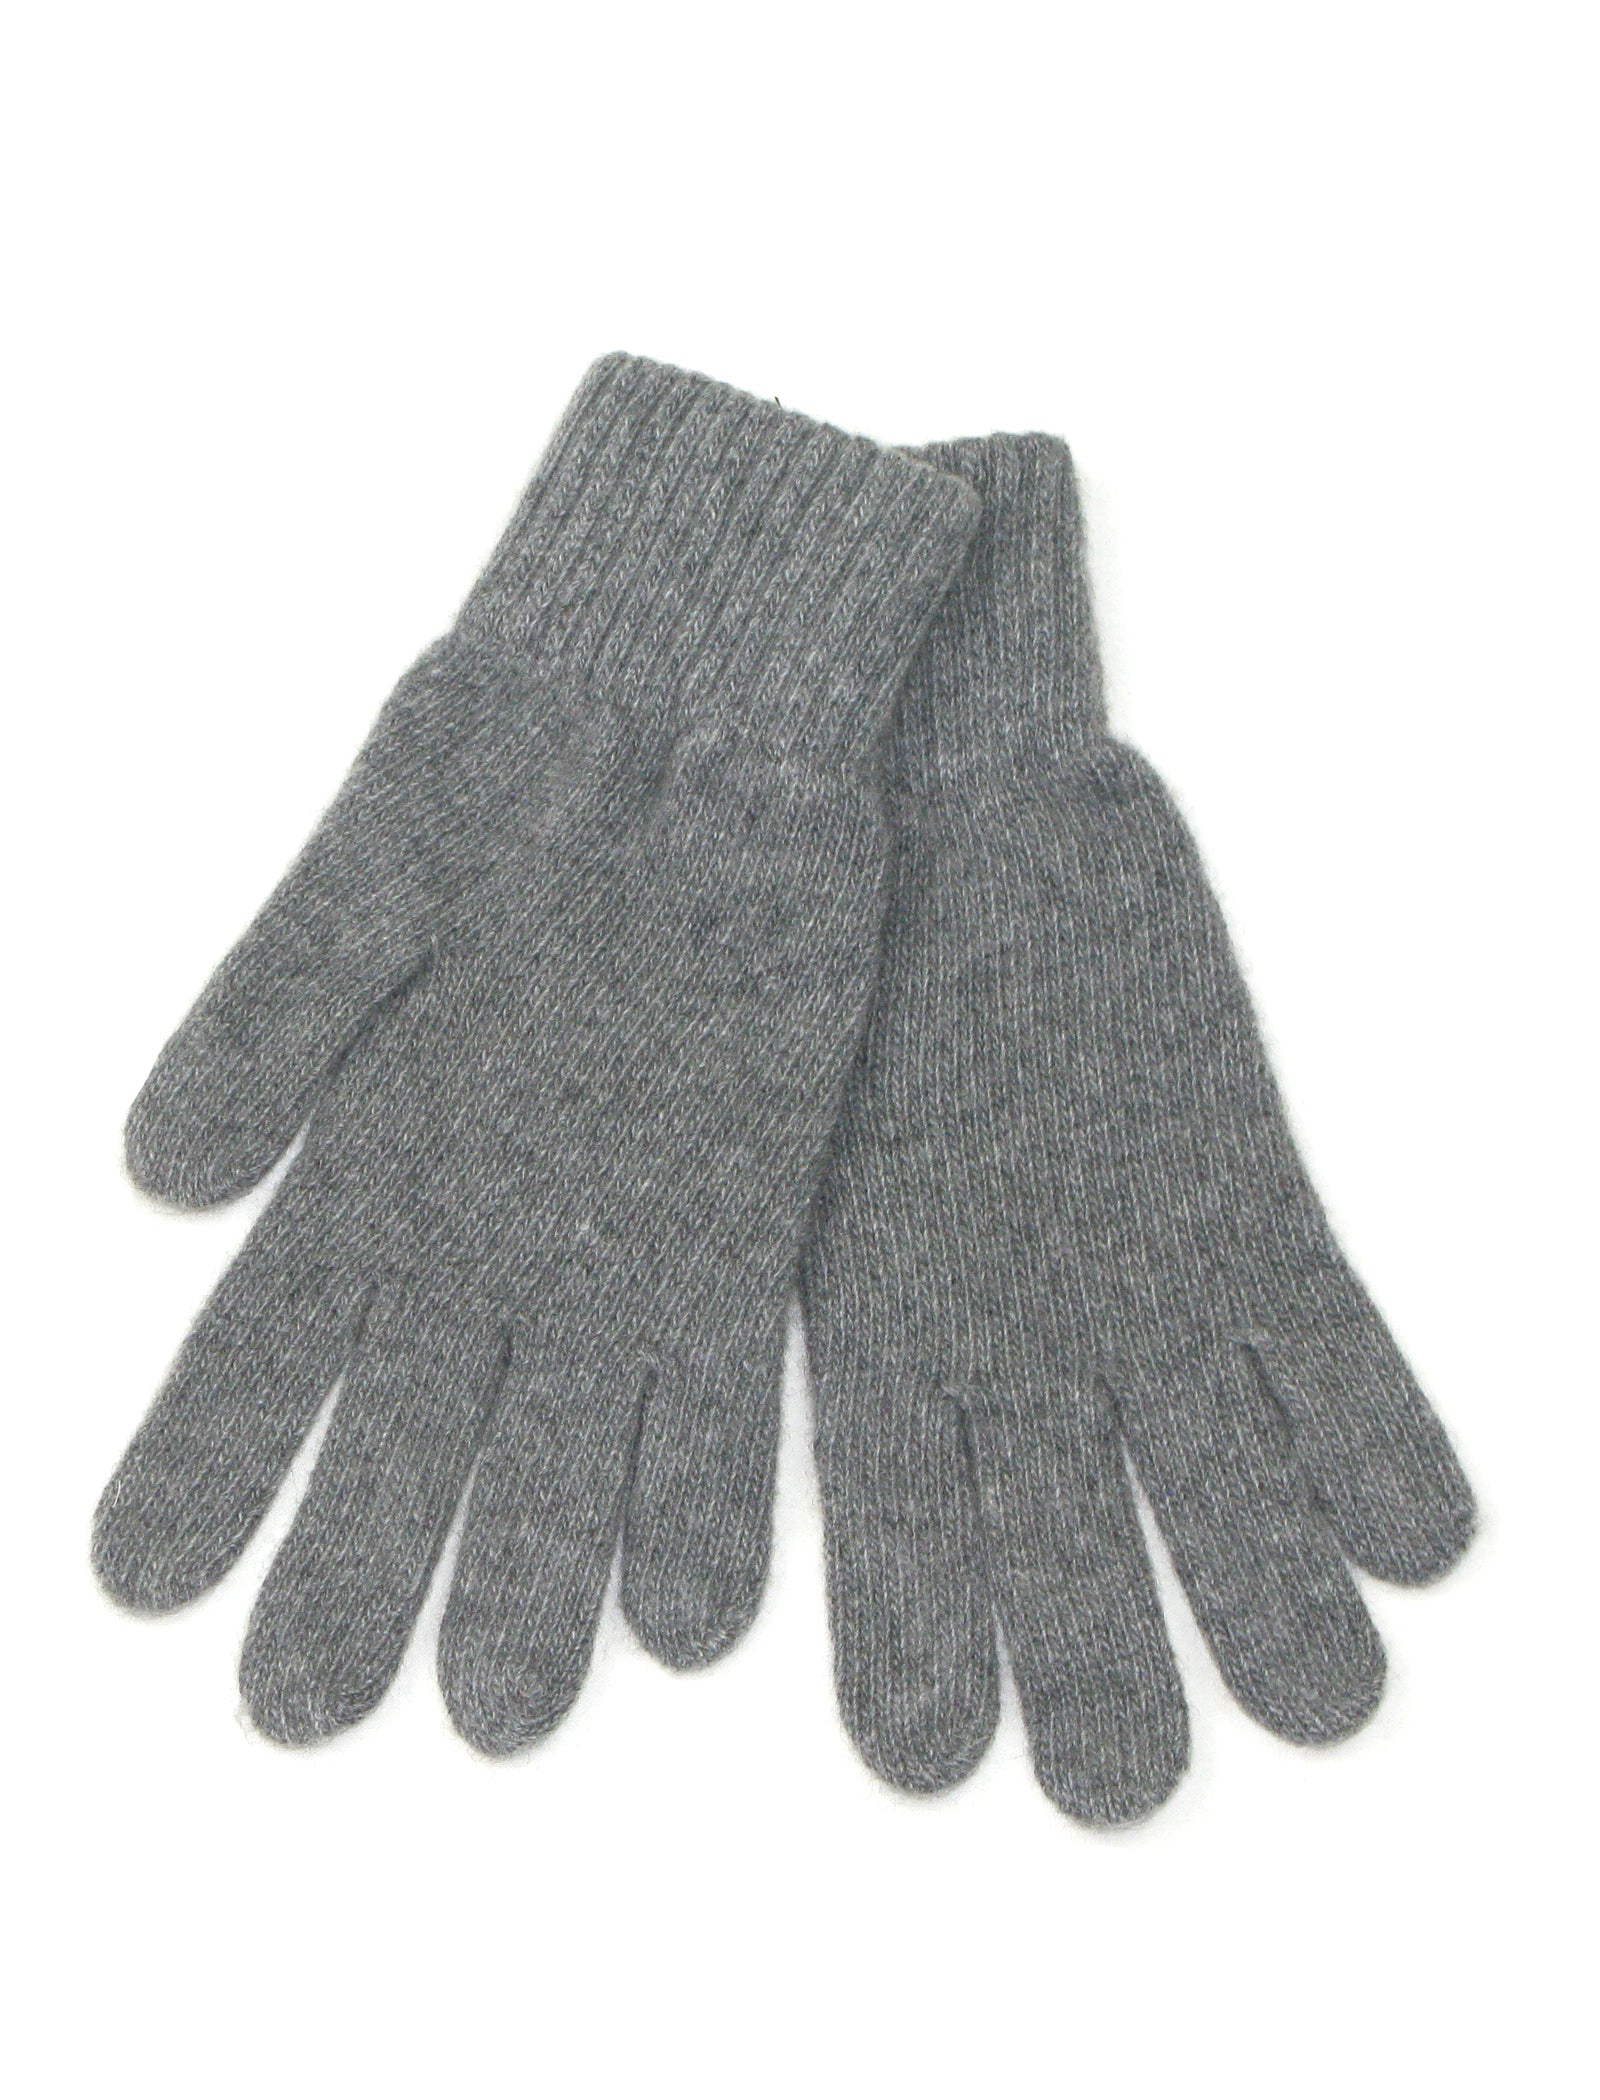 Men's Cashmere Glove - Made from 100% Cashmere – LOVARZI